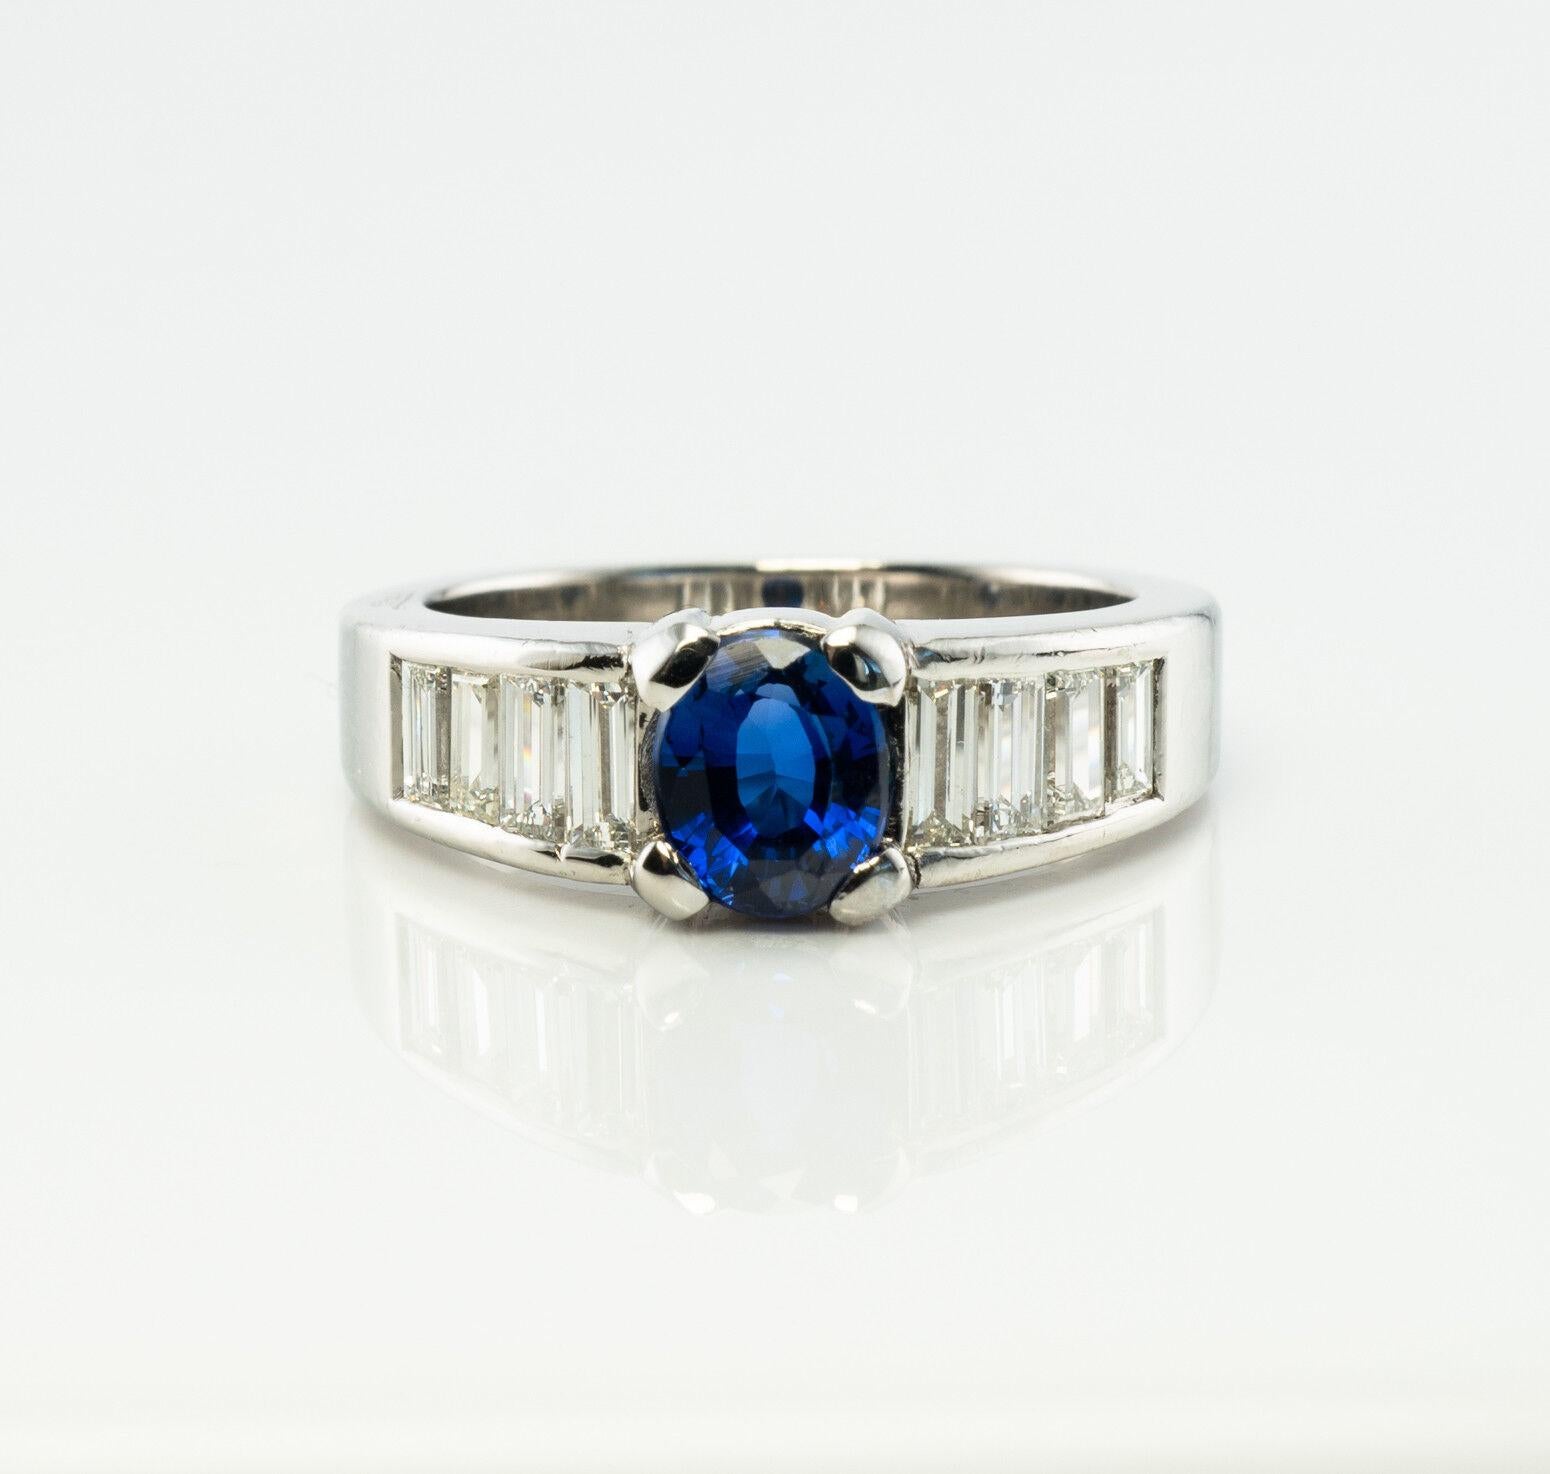 This absolutely stunning designer ring is finely crafted in Platinum (stamped) and also there is a Hallmark on the Gallery (please see the picture of hallmark). The center genuine Earth mined Sapphire measures 6.2mm x 5.5mm (1.06 carat). This is a